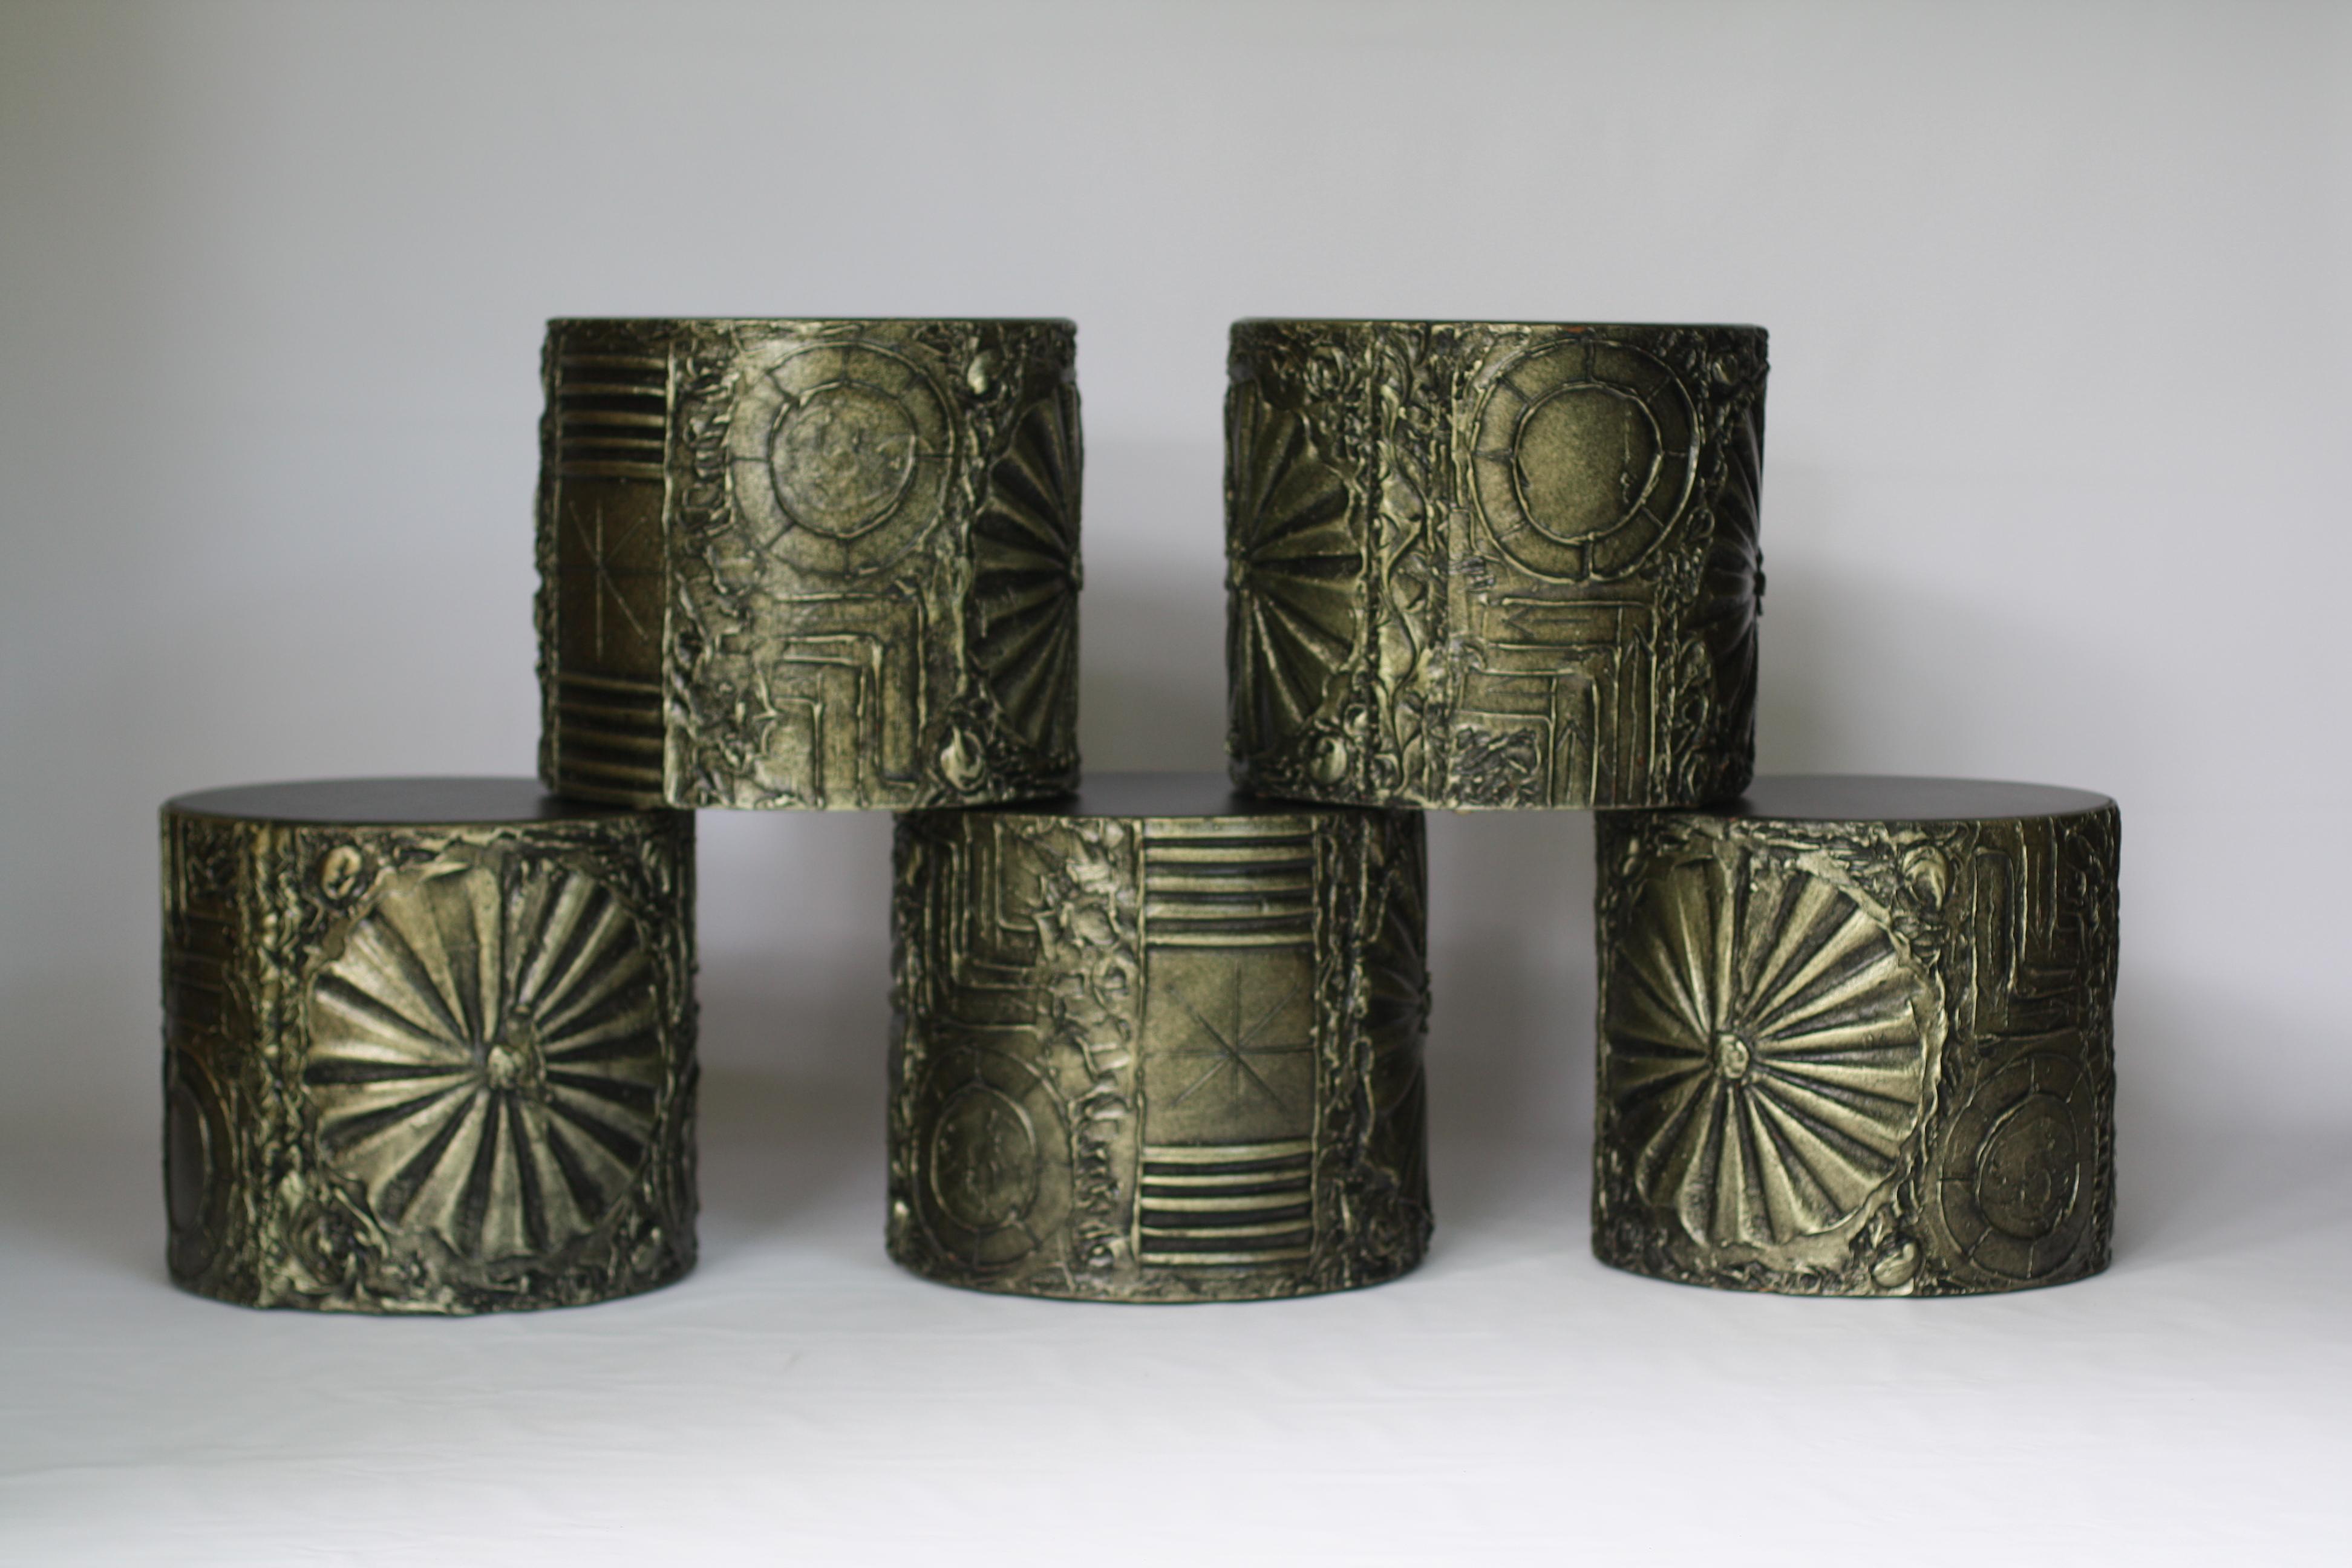 An excellent set of Adrian Pearsall for Craft Associates drum tables, up to 5 available to make a unique setting. This Brutalist series design from Adrian Pearsall mirrors Paul Evans sculpted bronze pieces. 

In excellent original condition.